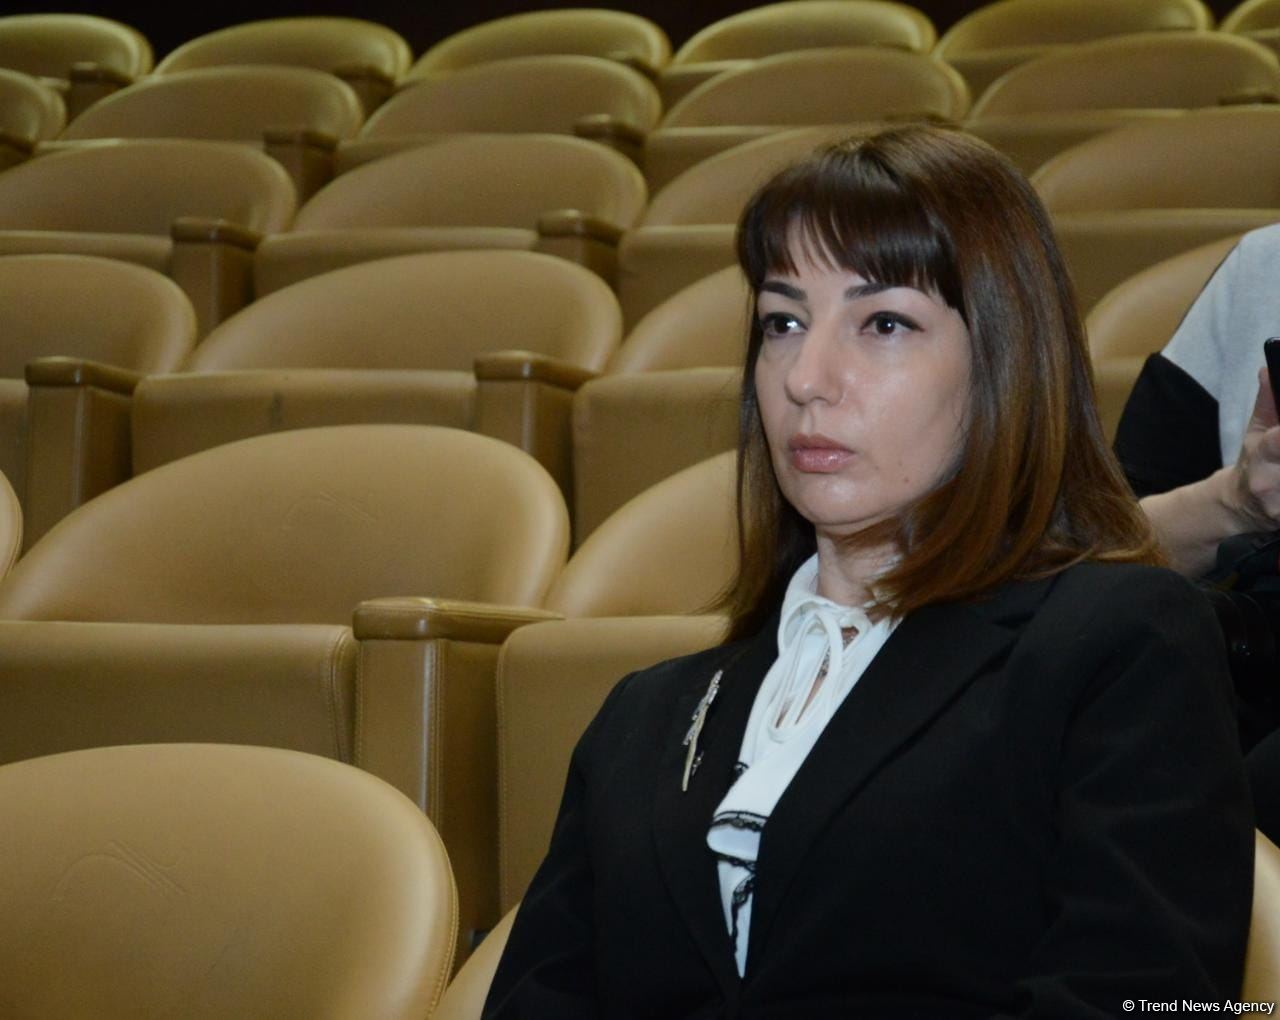 Azerbaijani minister talks about cultural project related to Shusha (PHOTO)